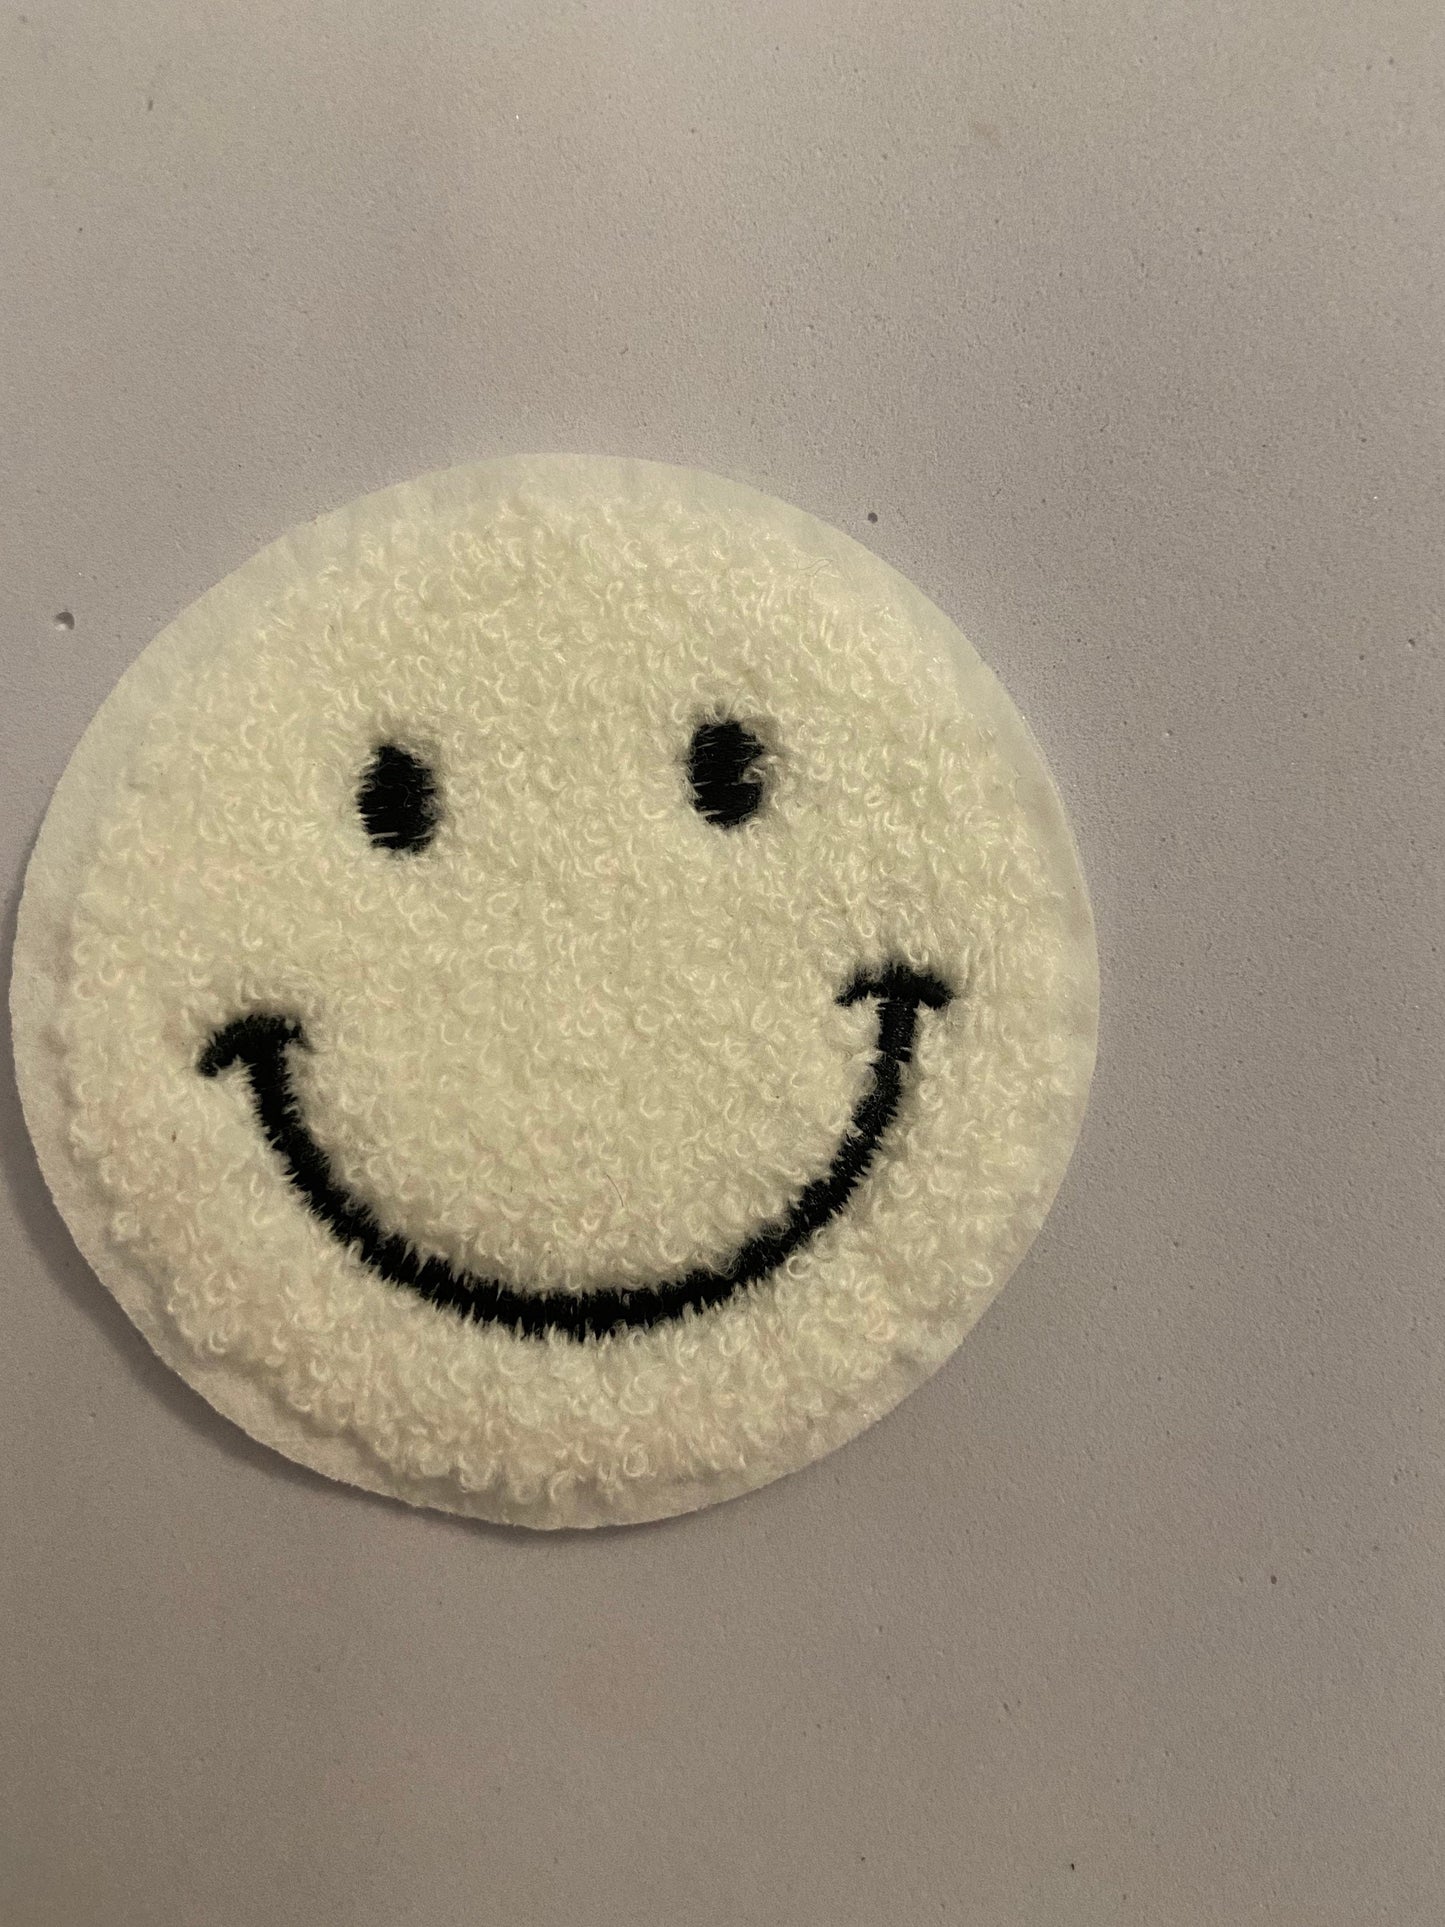 Iron on Patch, chenille smiley face